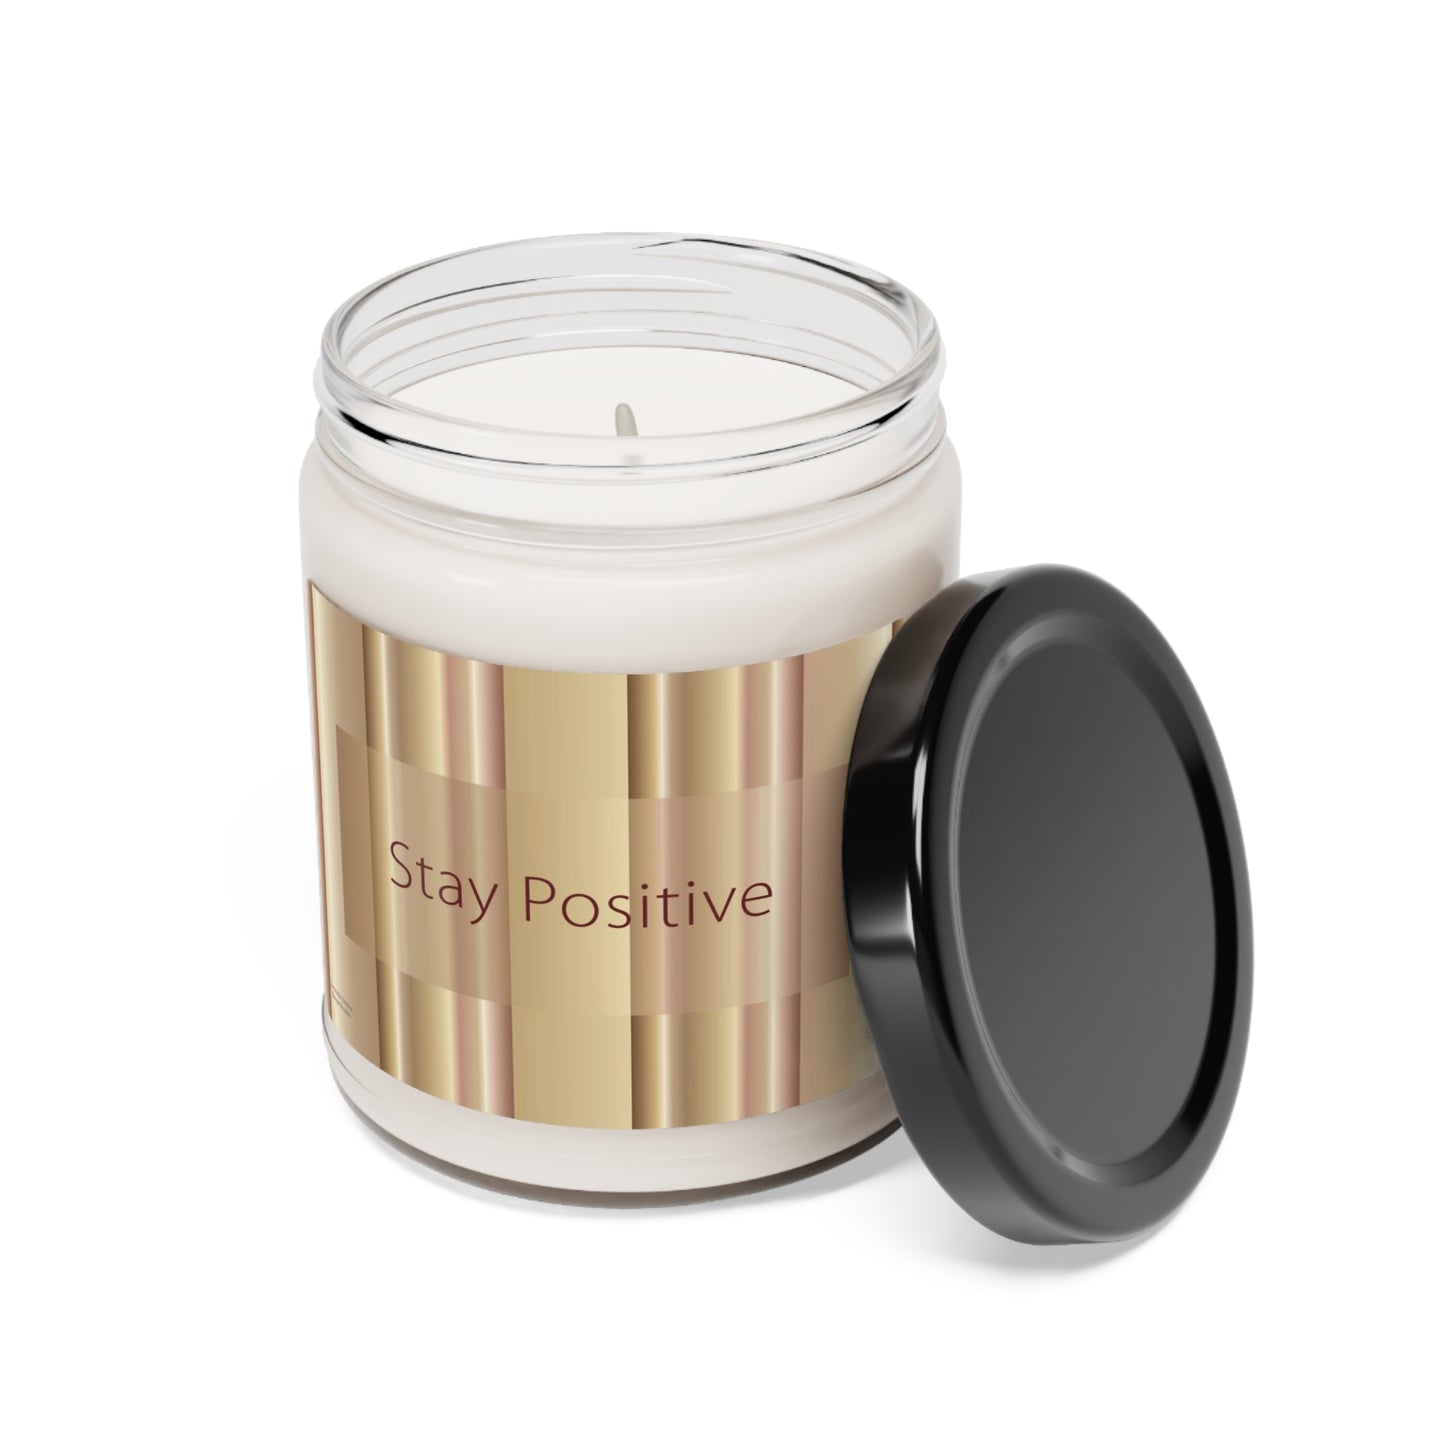 Scented Soy Candle, 9oz Stay Positive - Design No.2000